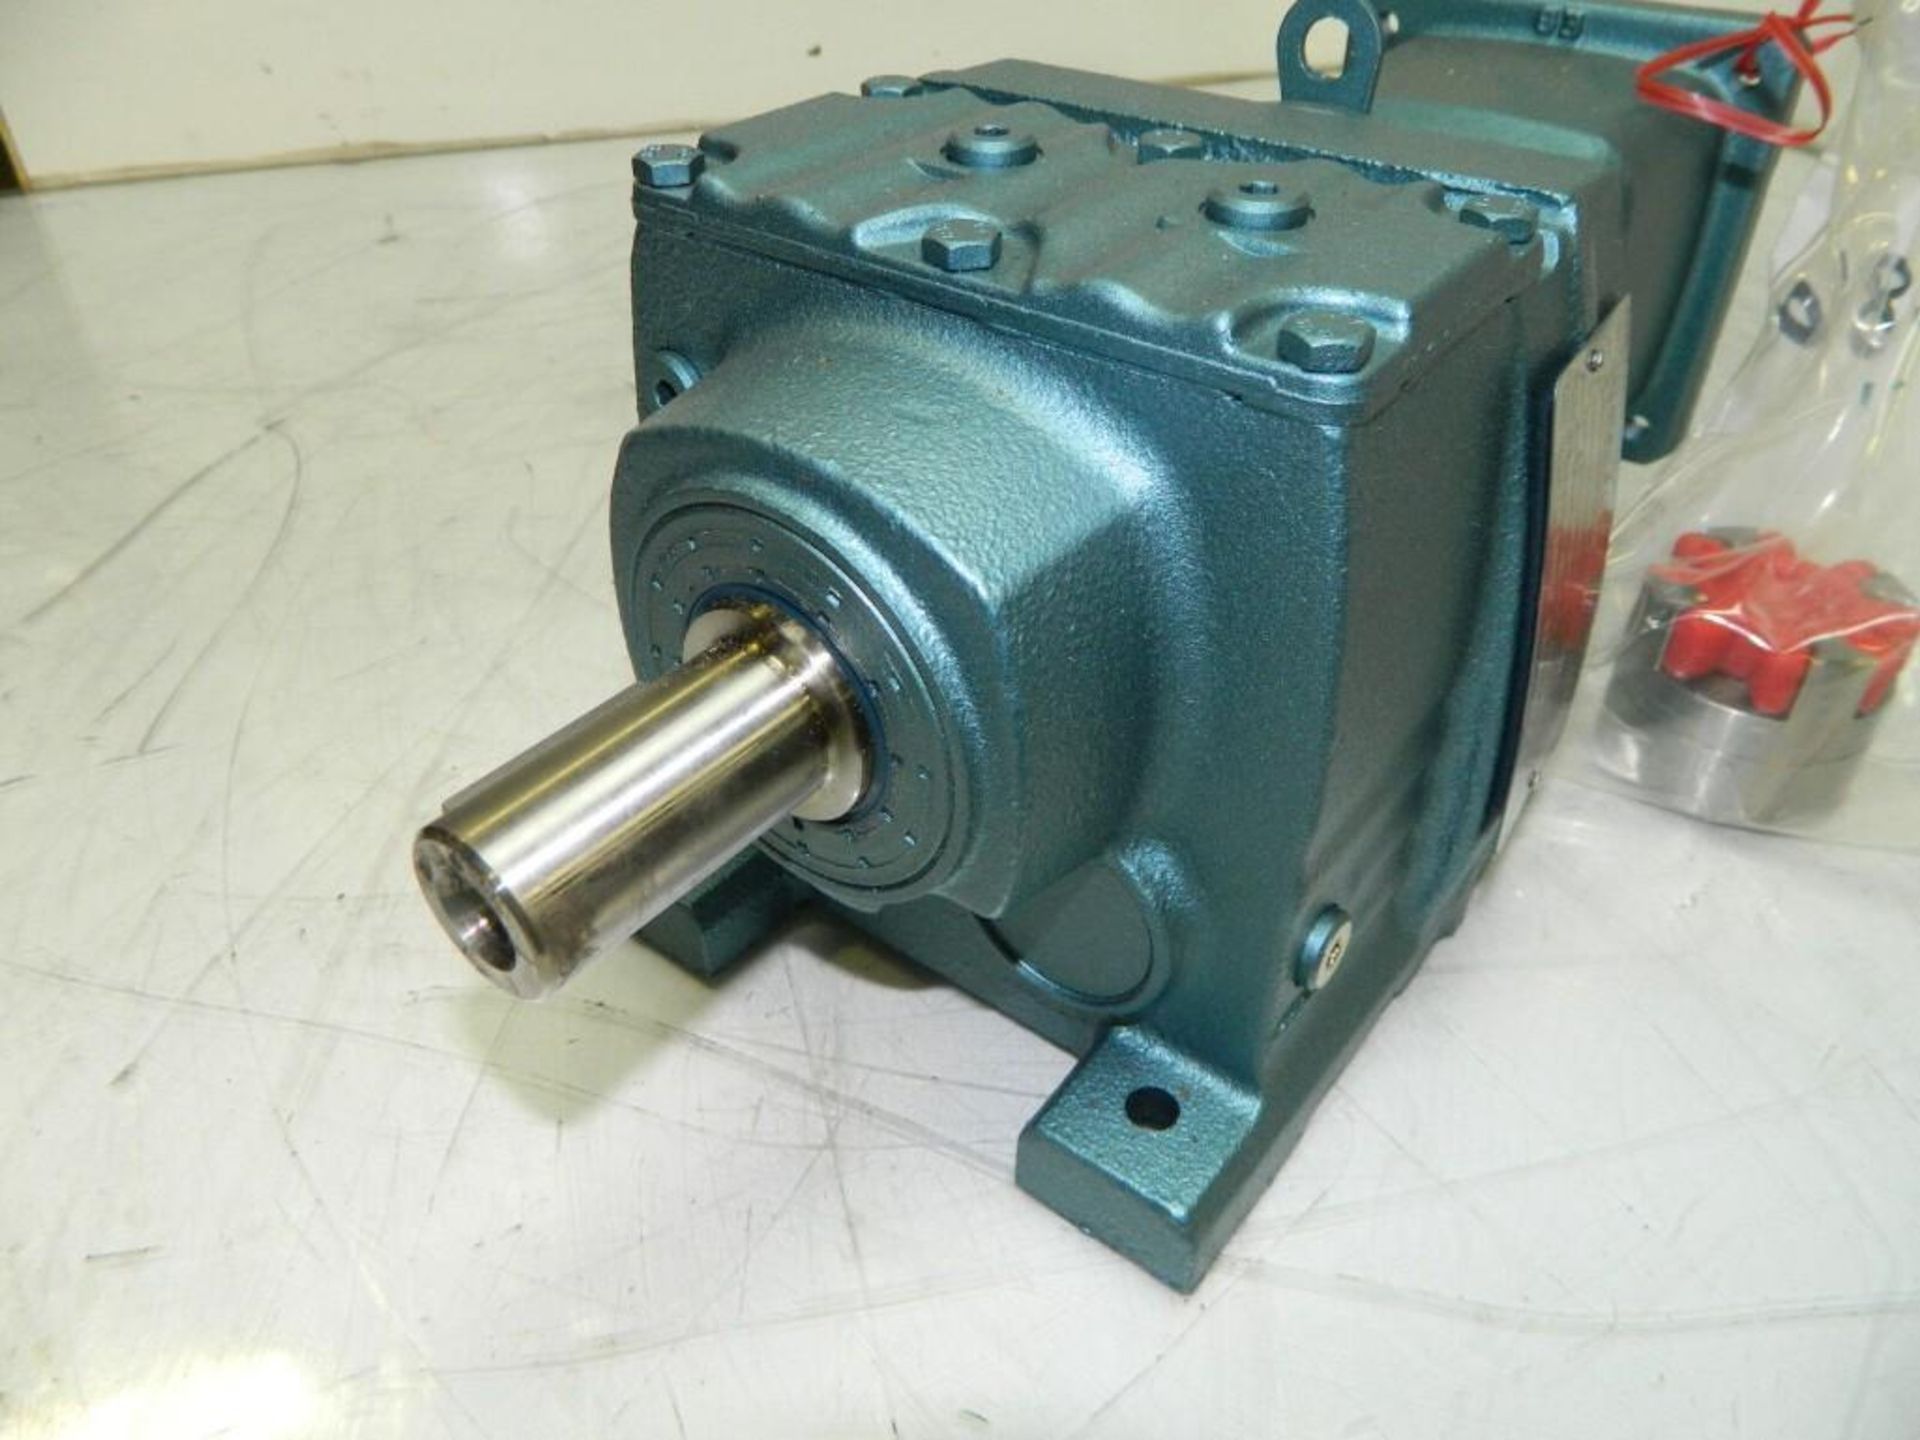 NEW Sew Eurodrive Speed Reducer Gearbox - Image 2 of 5